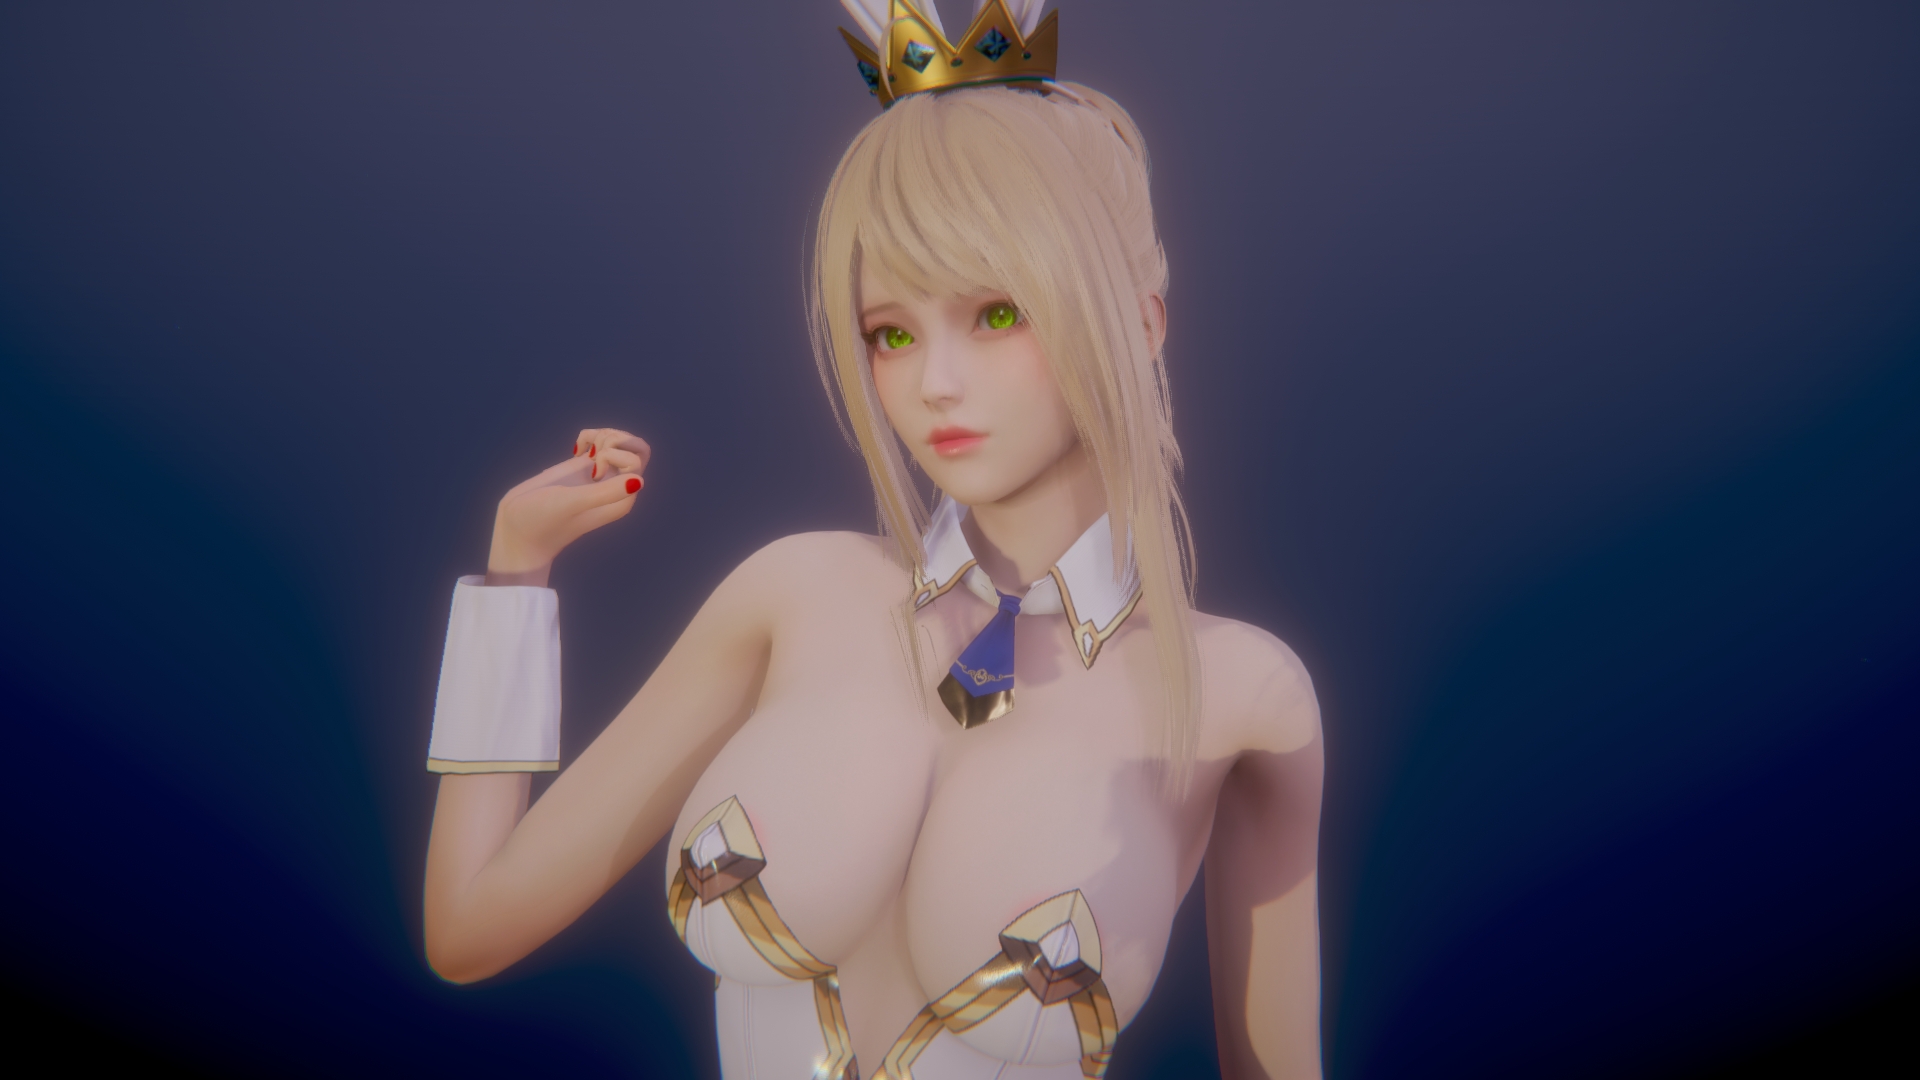 Honey Select 2 Honey Select 2 3d Girl Bunny Sexy Aigirl Big Tits Big Breasts Outfit Long Legs Animal Ears Sfw 2